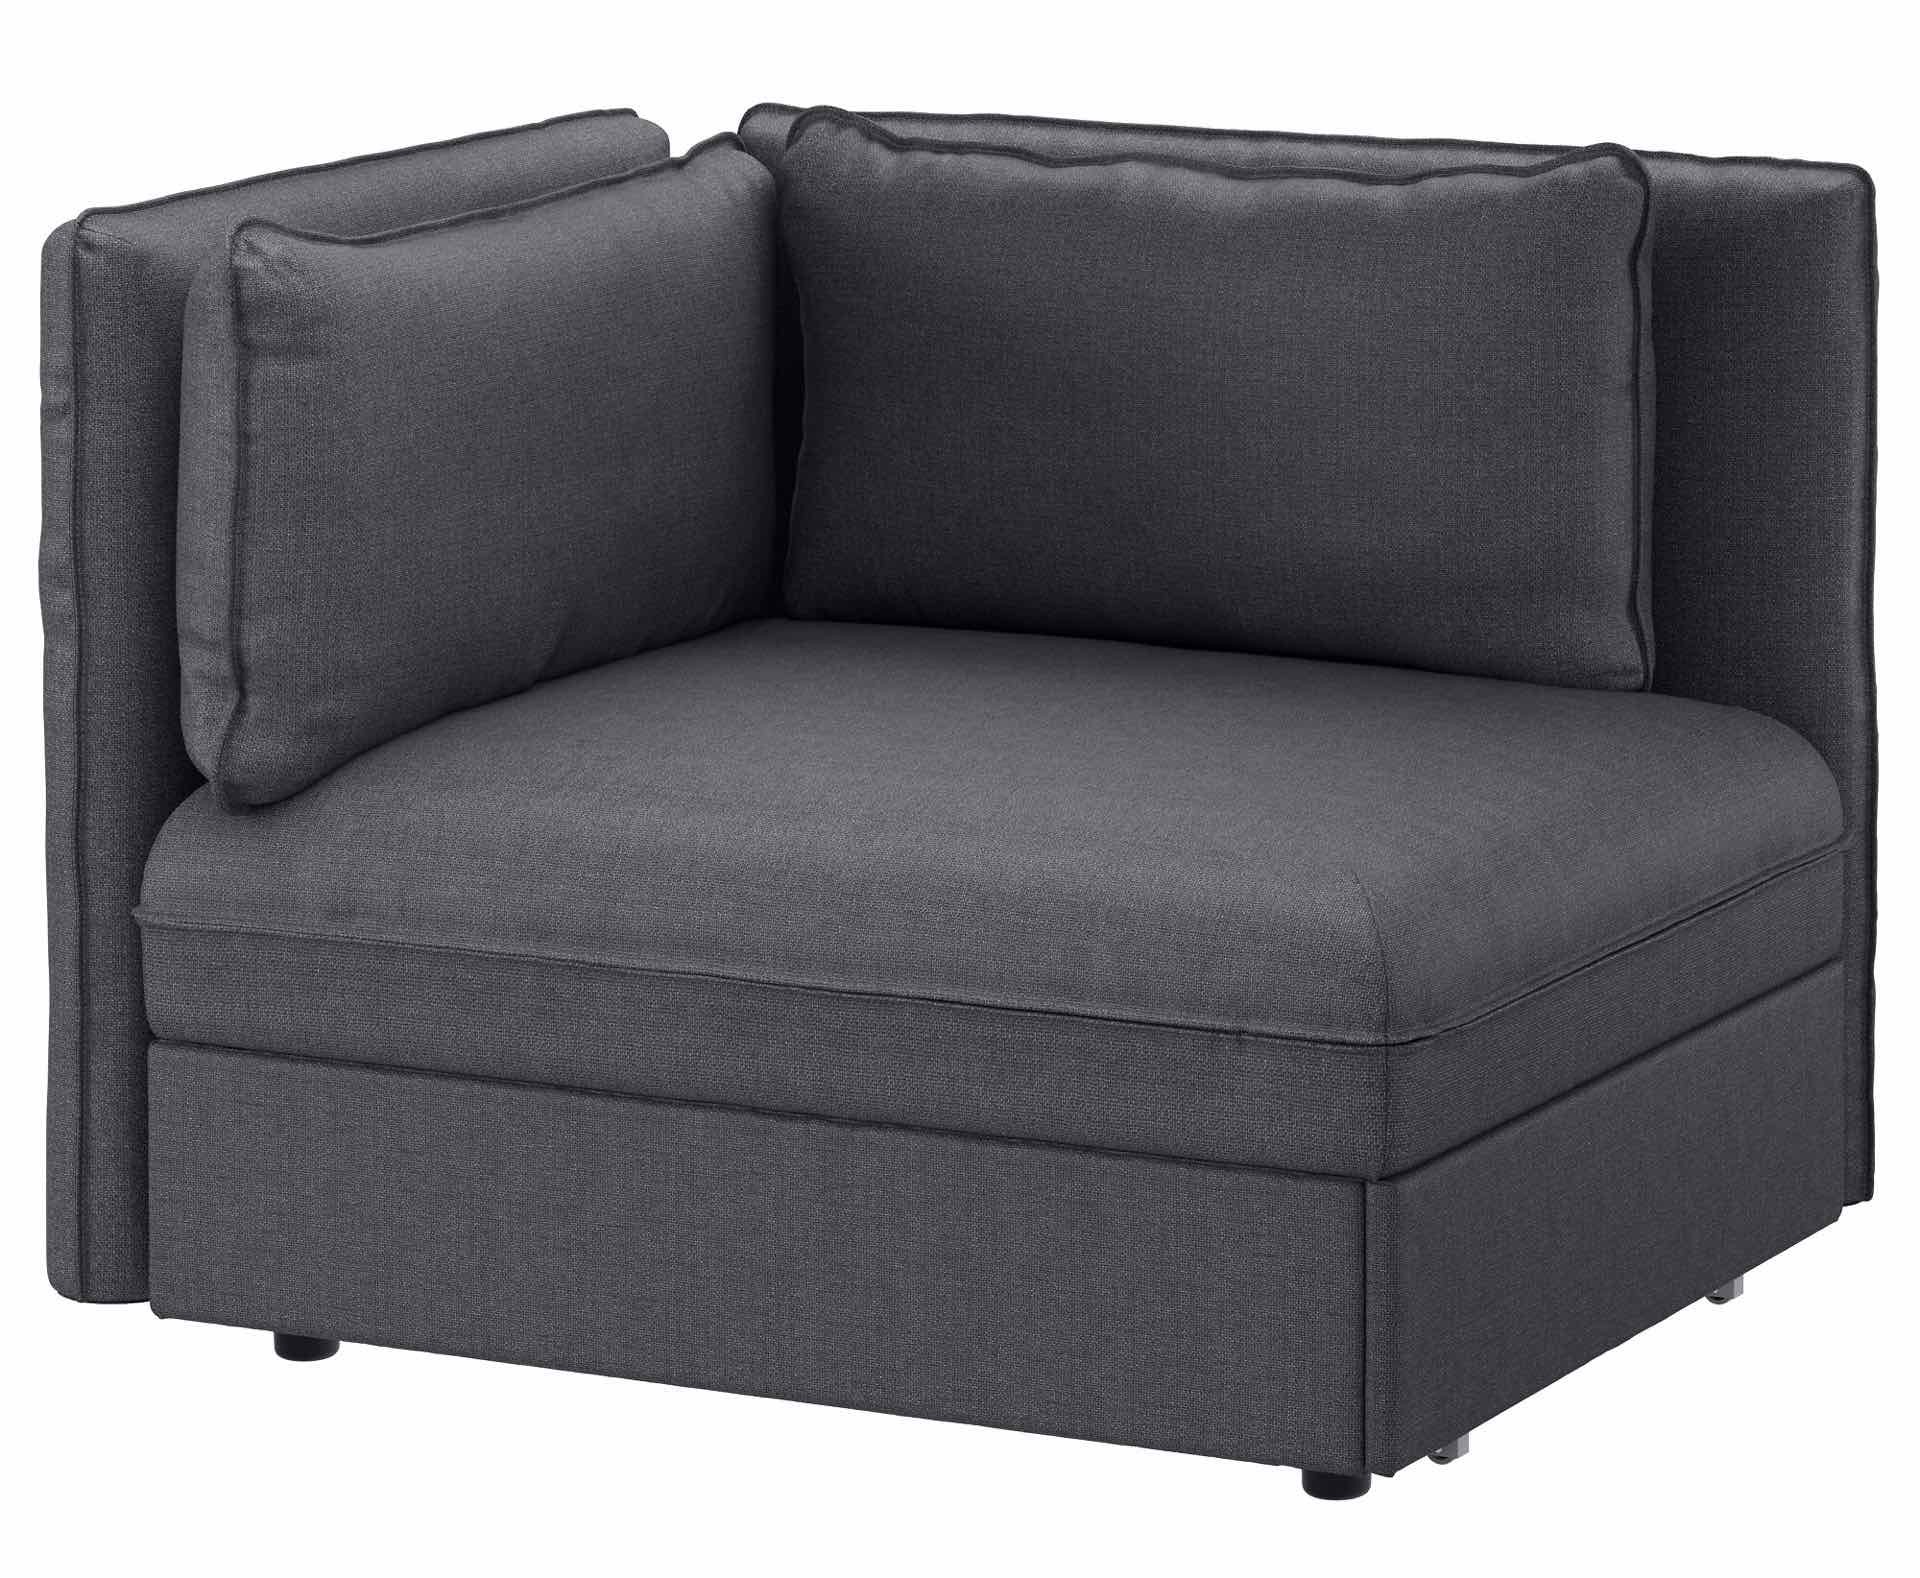 VALLENTUNA sleeper sectional. (normally $635 for this configuration, but prices vary otherwise)